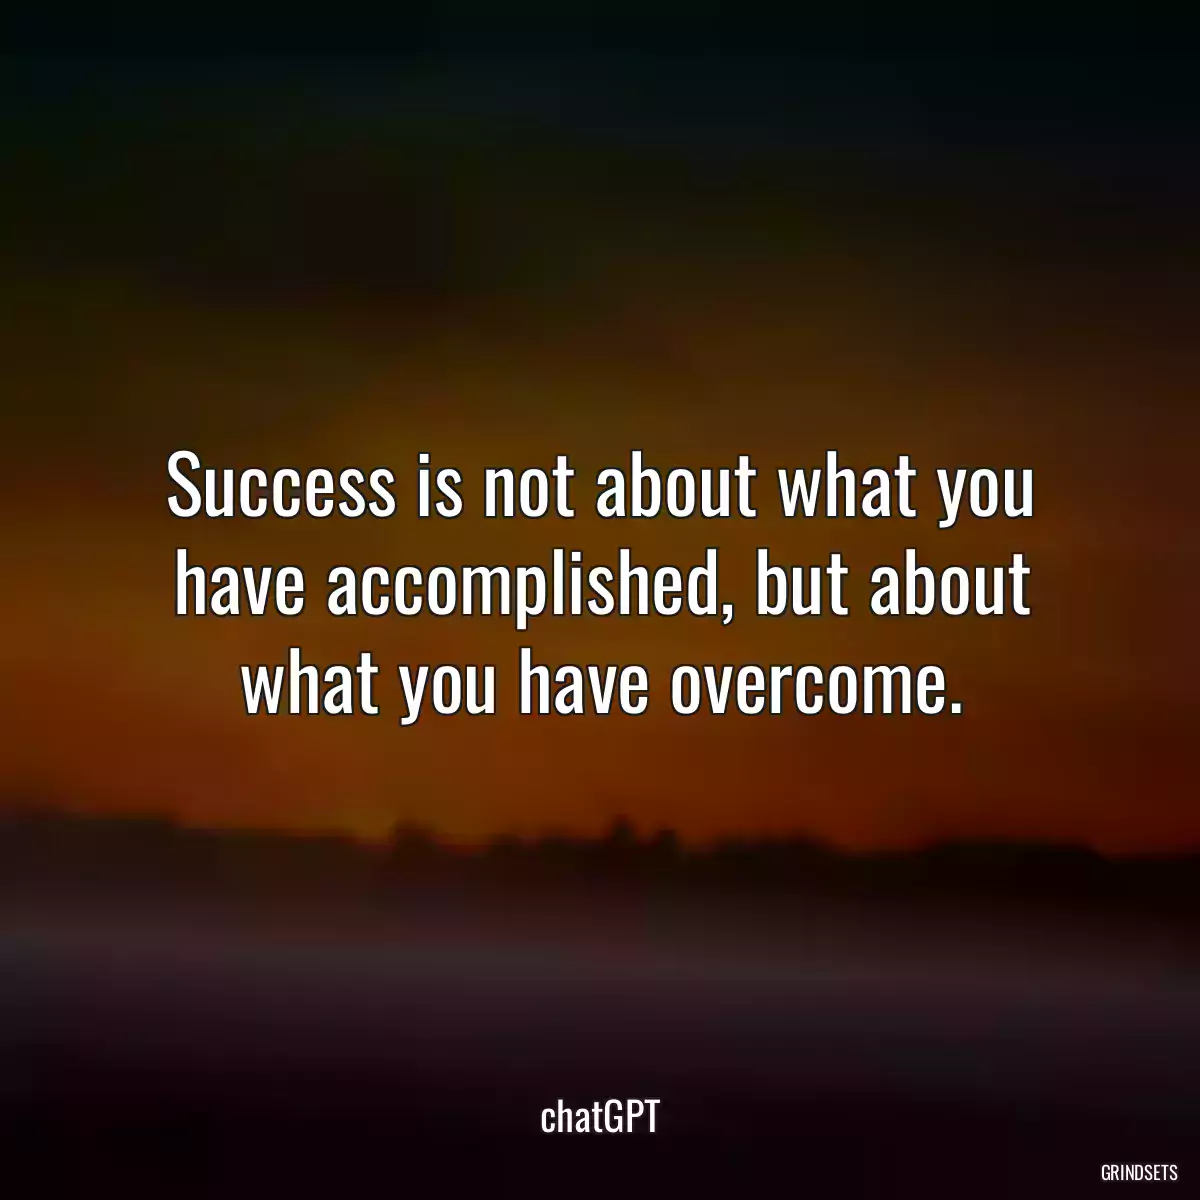 Success is not about what you have accomplished, but about what you have overcome.